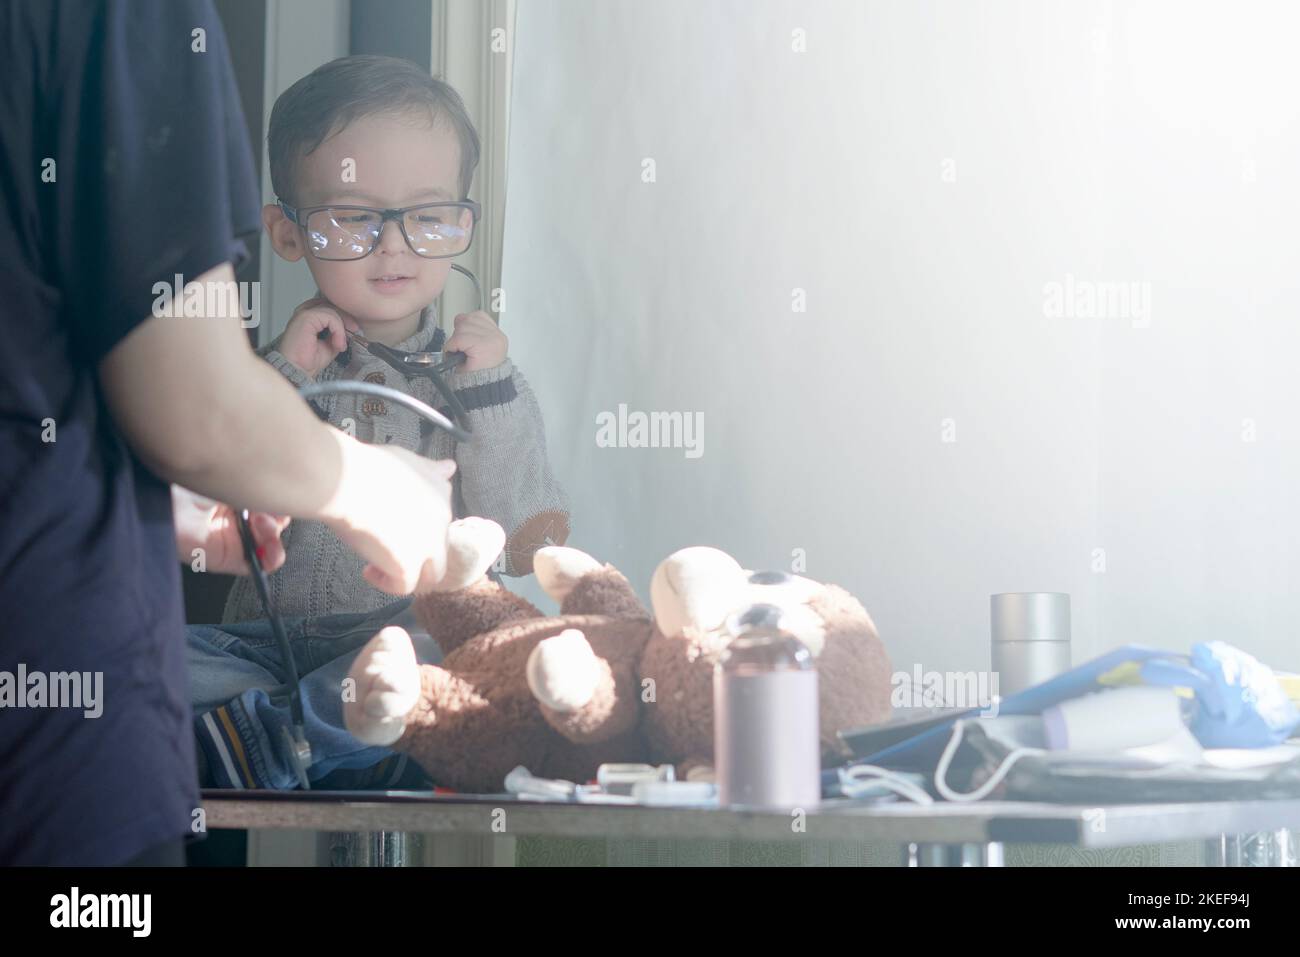 a little boy playing with his teddy bear toy in front of the mirror that he is looking at and holding Stock Photo